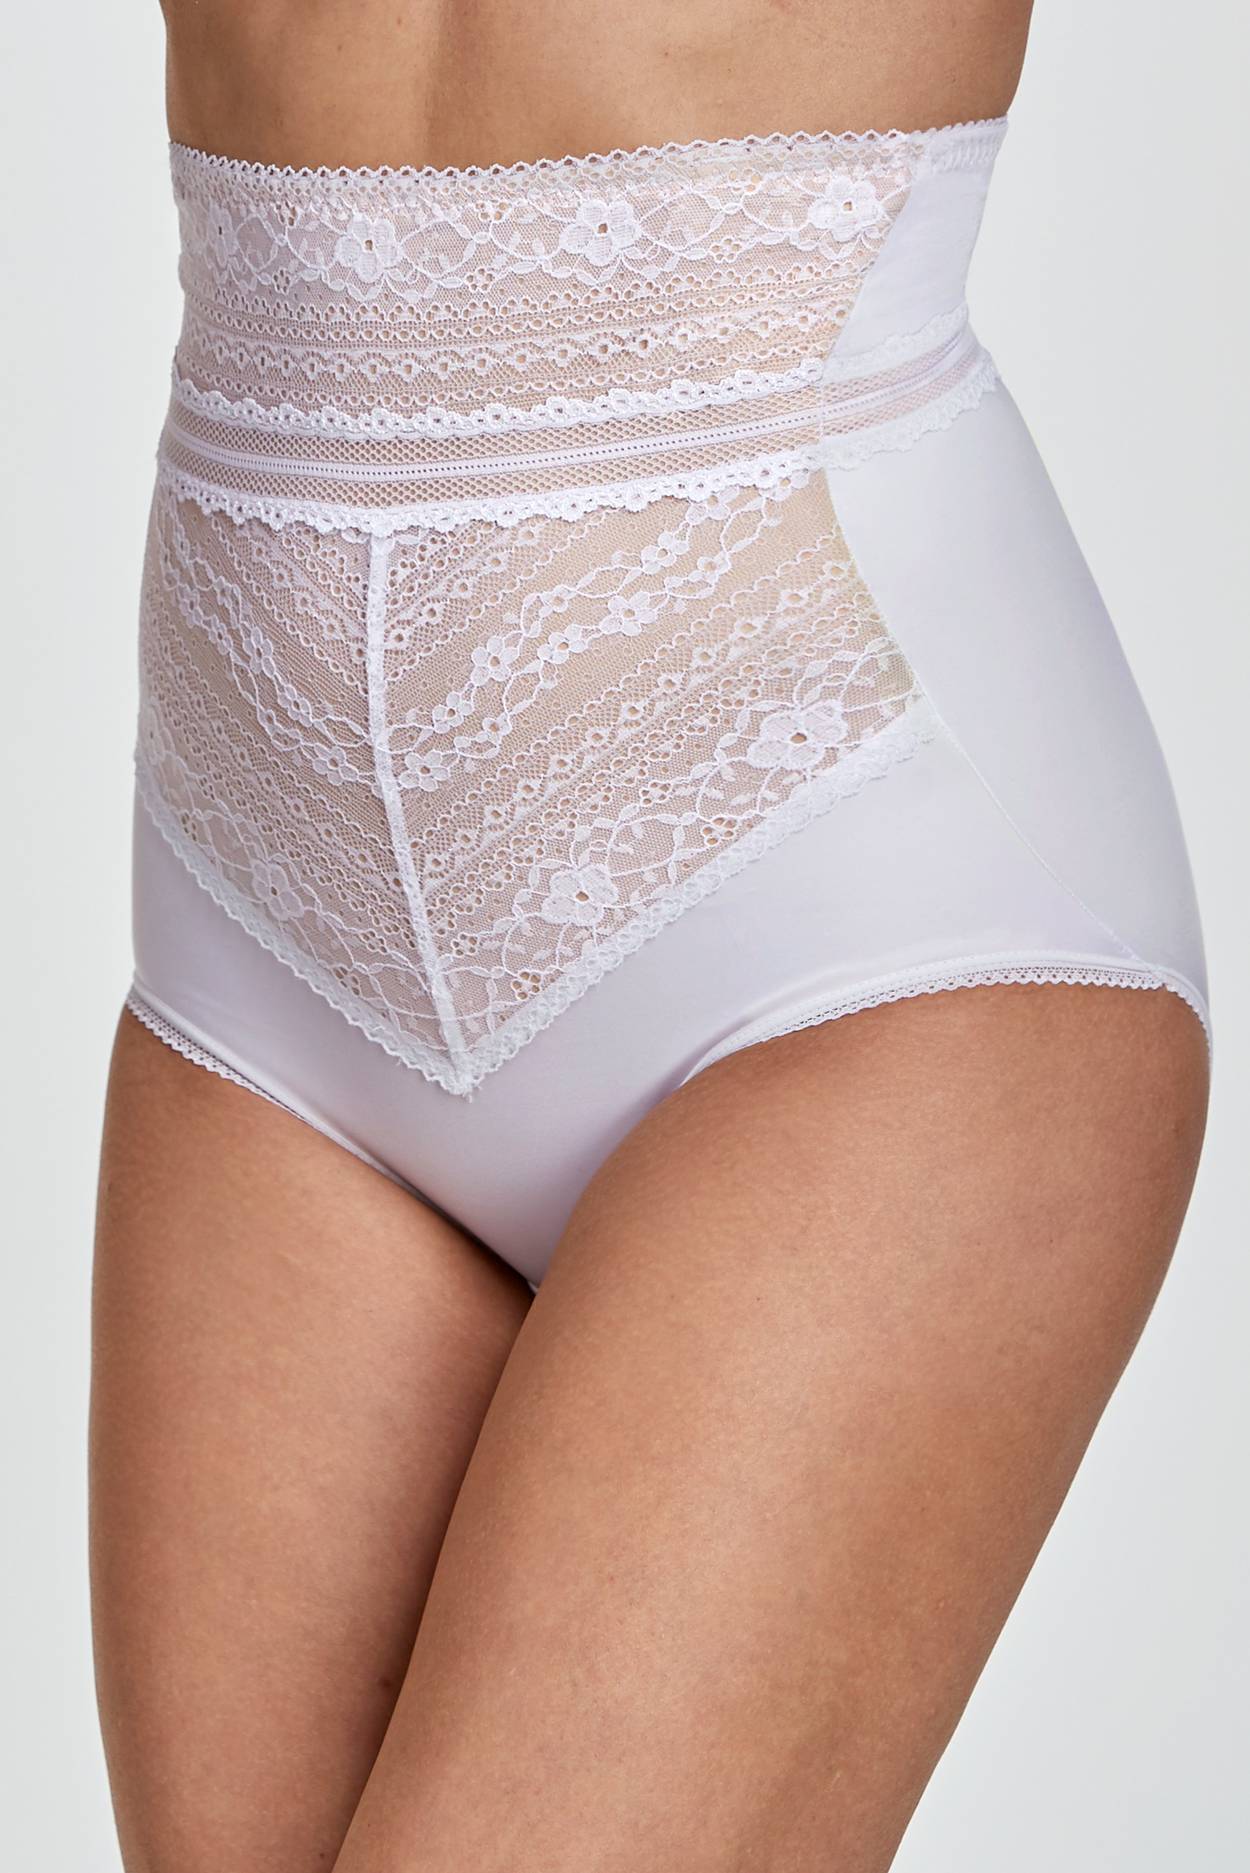 Lace Vision Miederhose mit hoher Taille